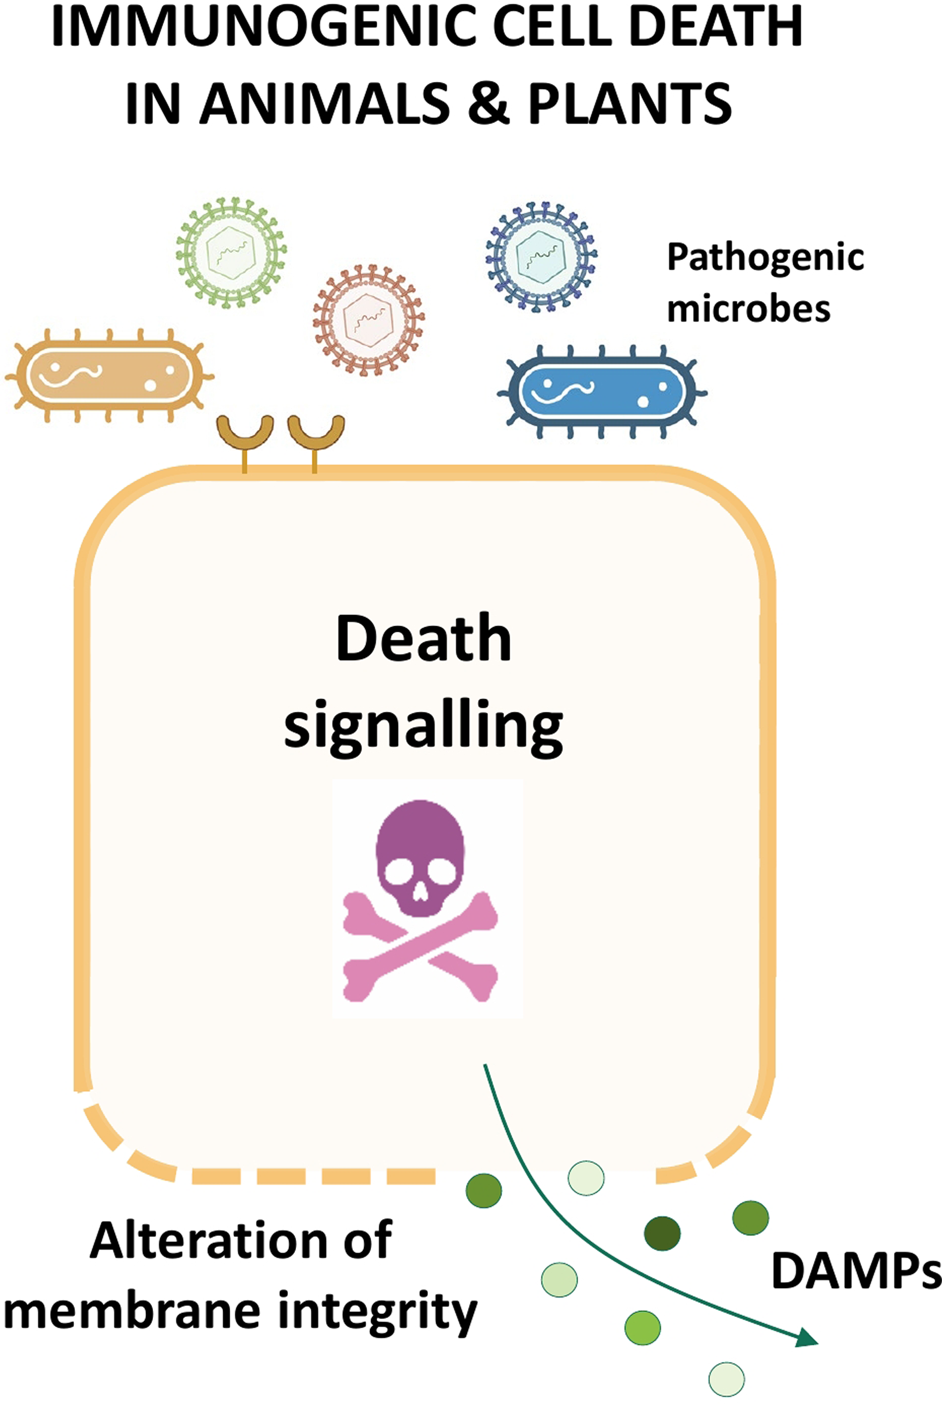 Dying in self-defence: a comparative overview of immunogenic cell death  signalling in animals and plants | Cell Death & Differentiation